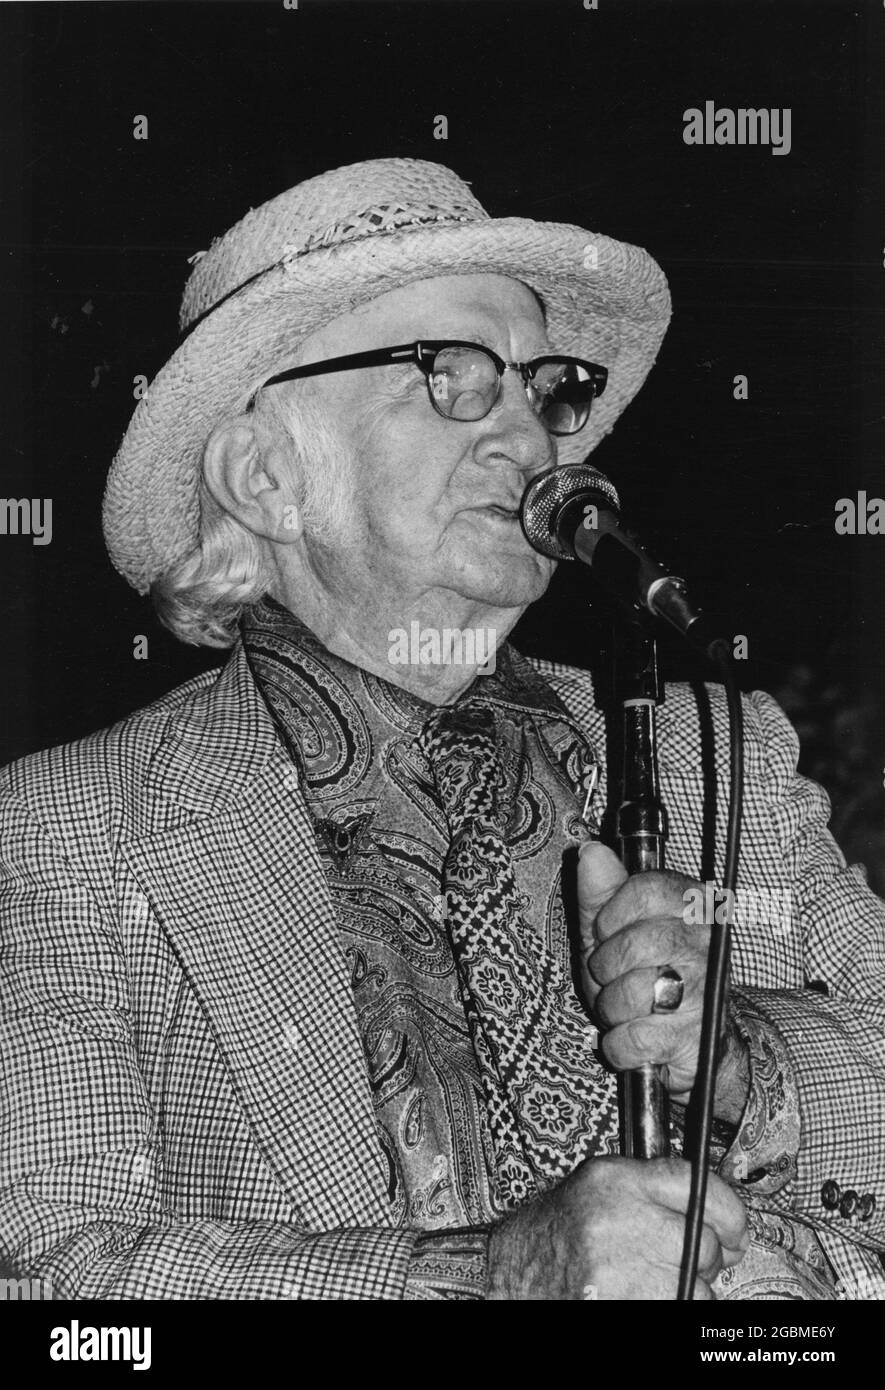 Austin, Texas USA, circa 1984: Singer Kenneth Threadgill croons into the microphone while performing. Stock Photo